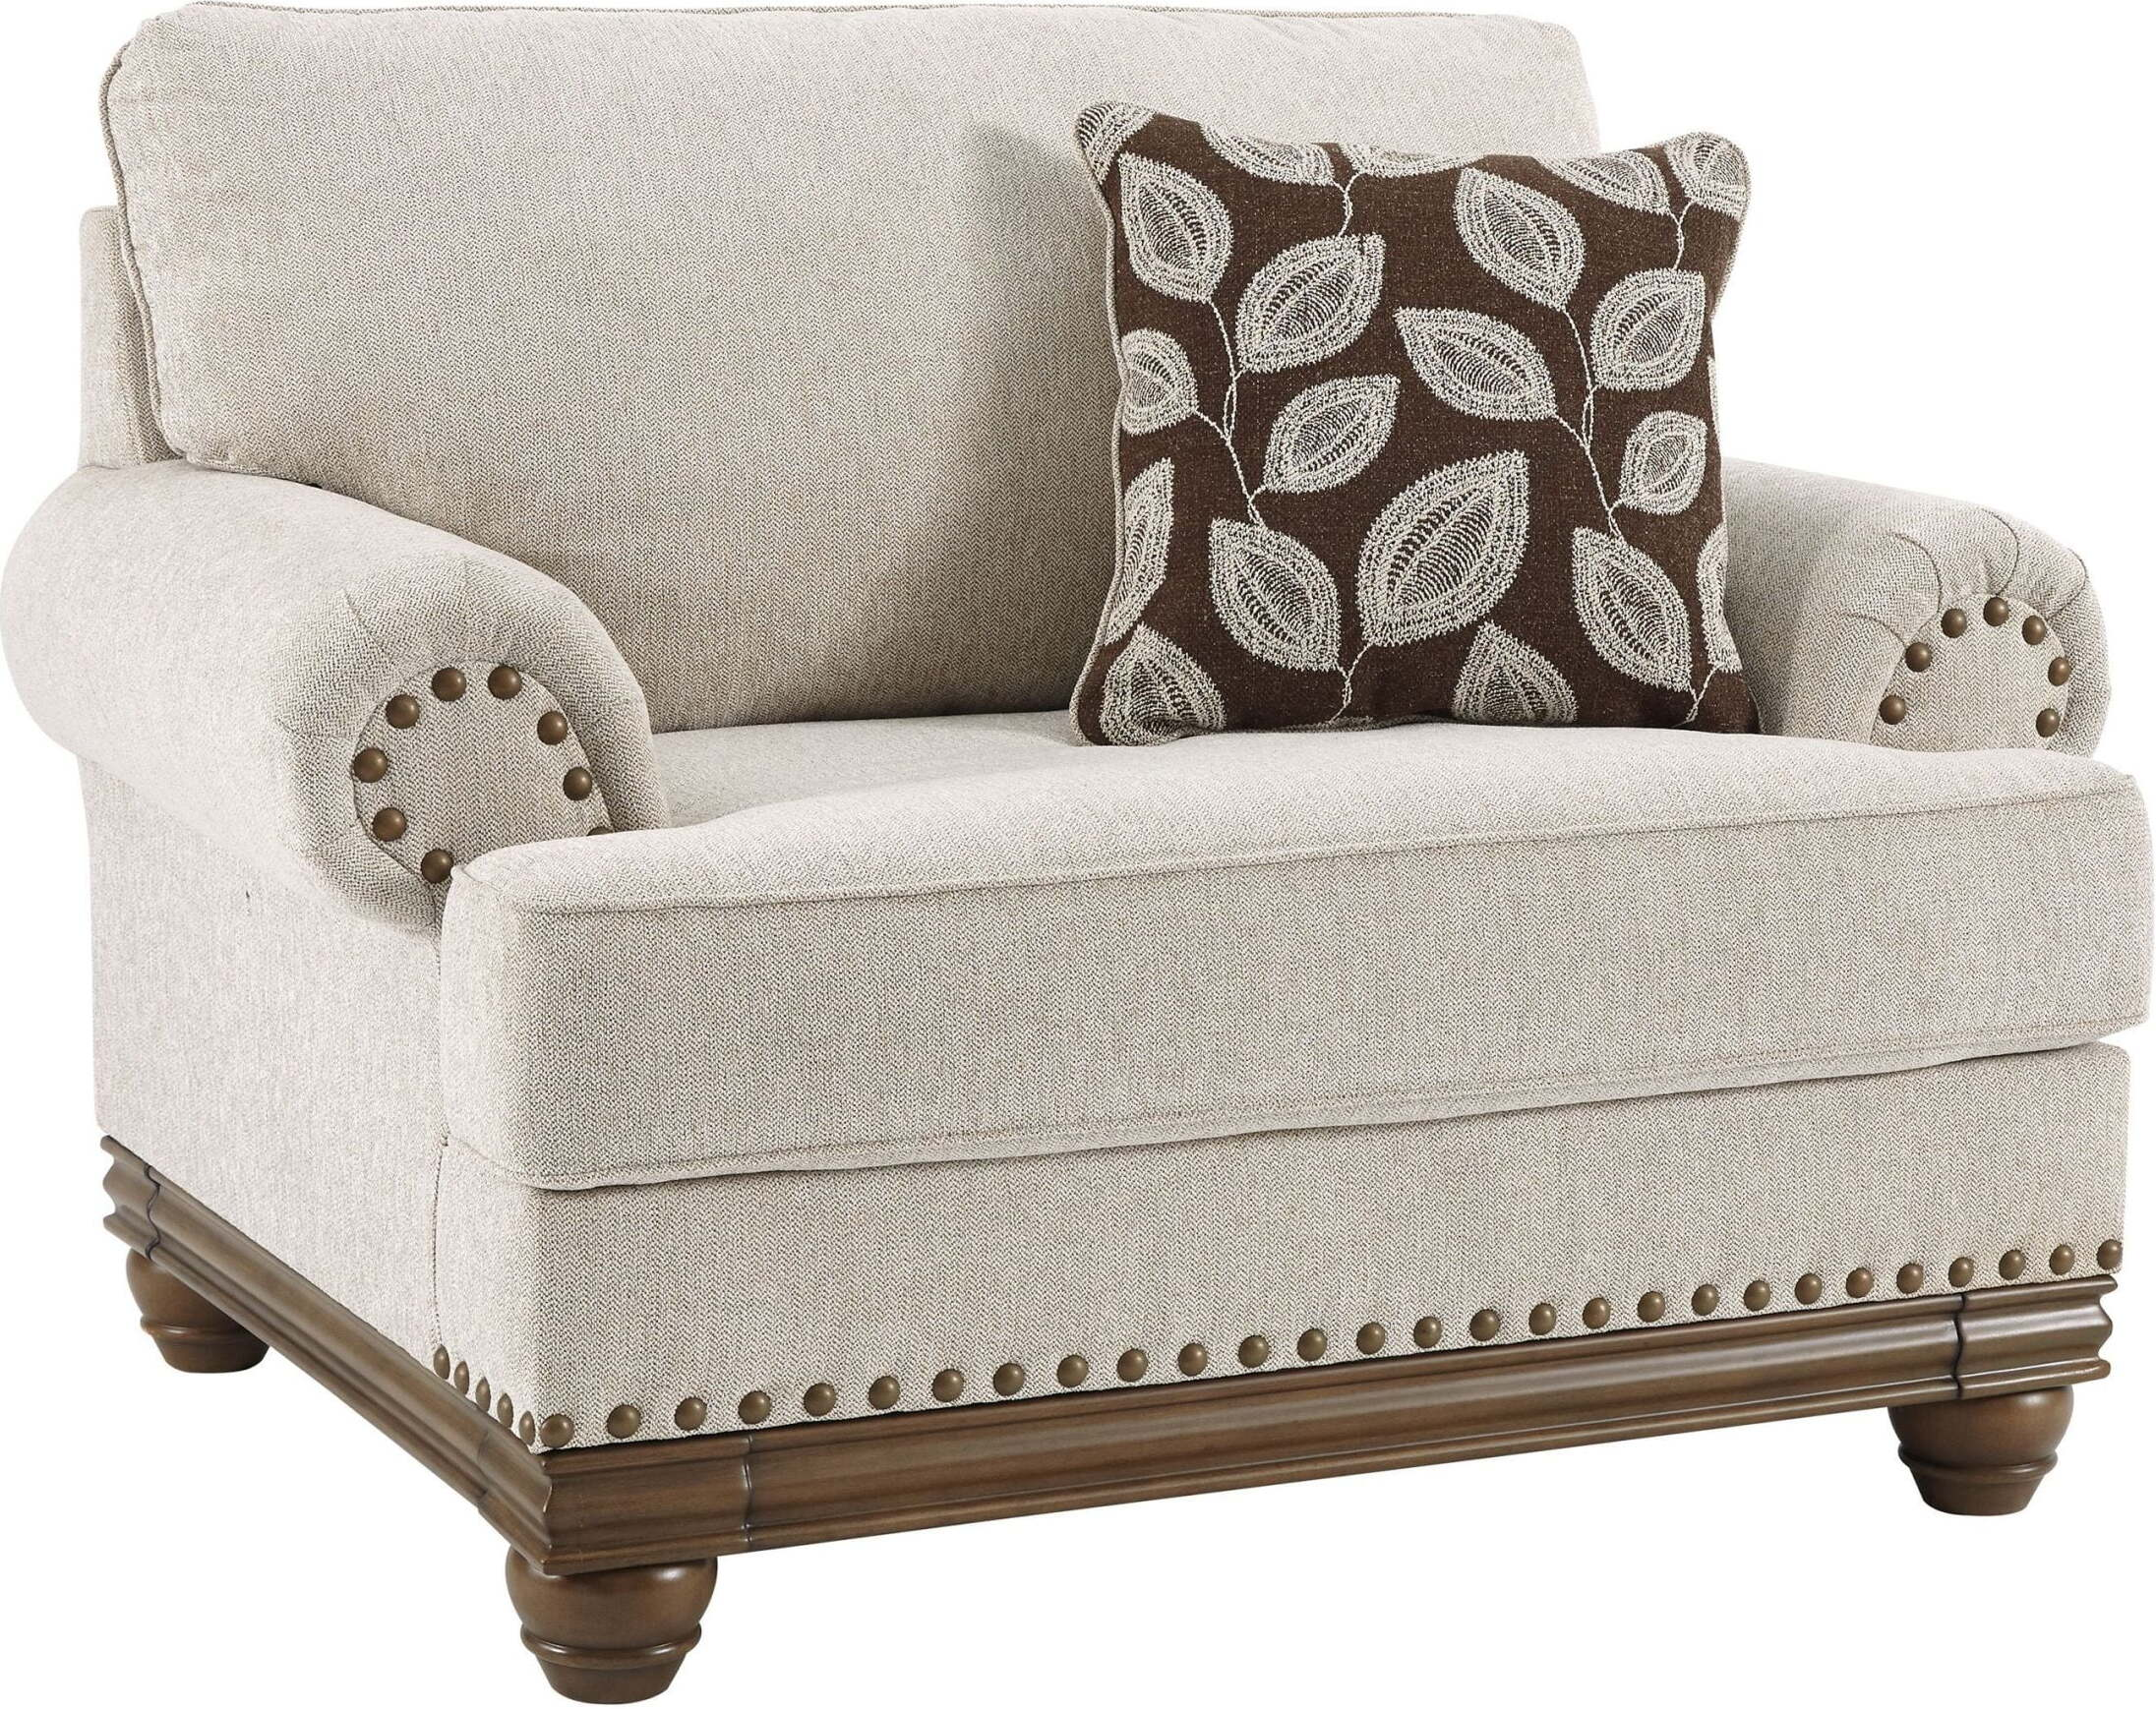 Harleson Living Room Set In Wheat Harleson Collection by Ashley Furniture